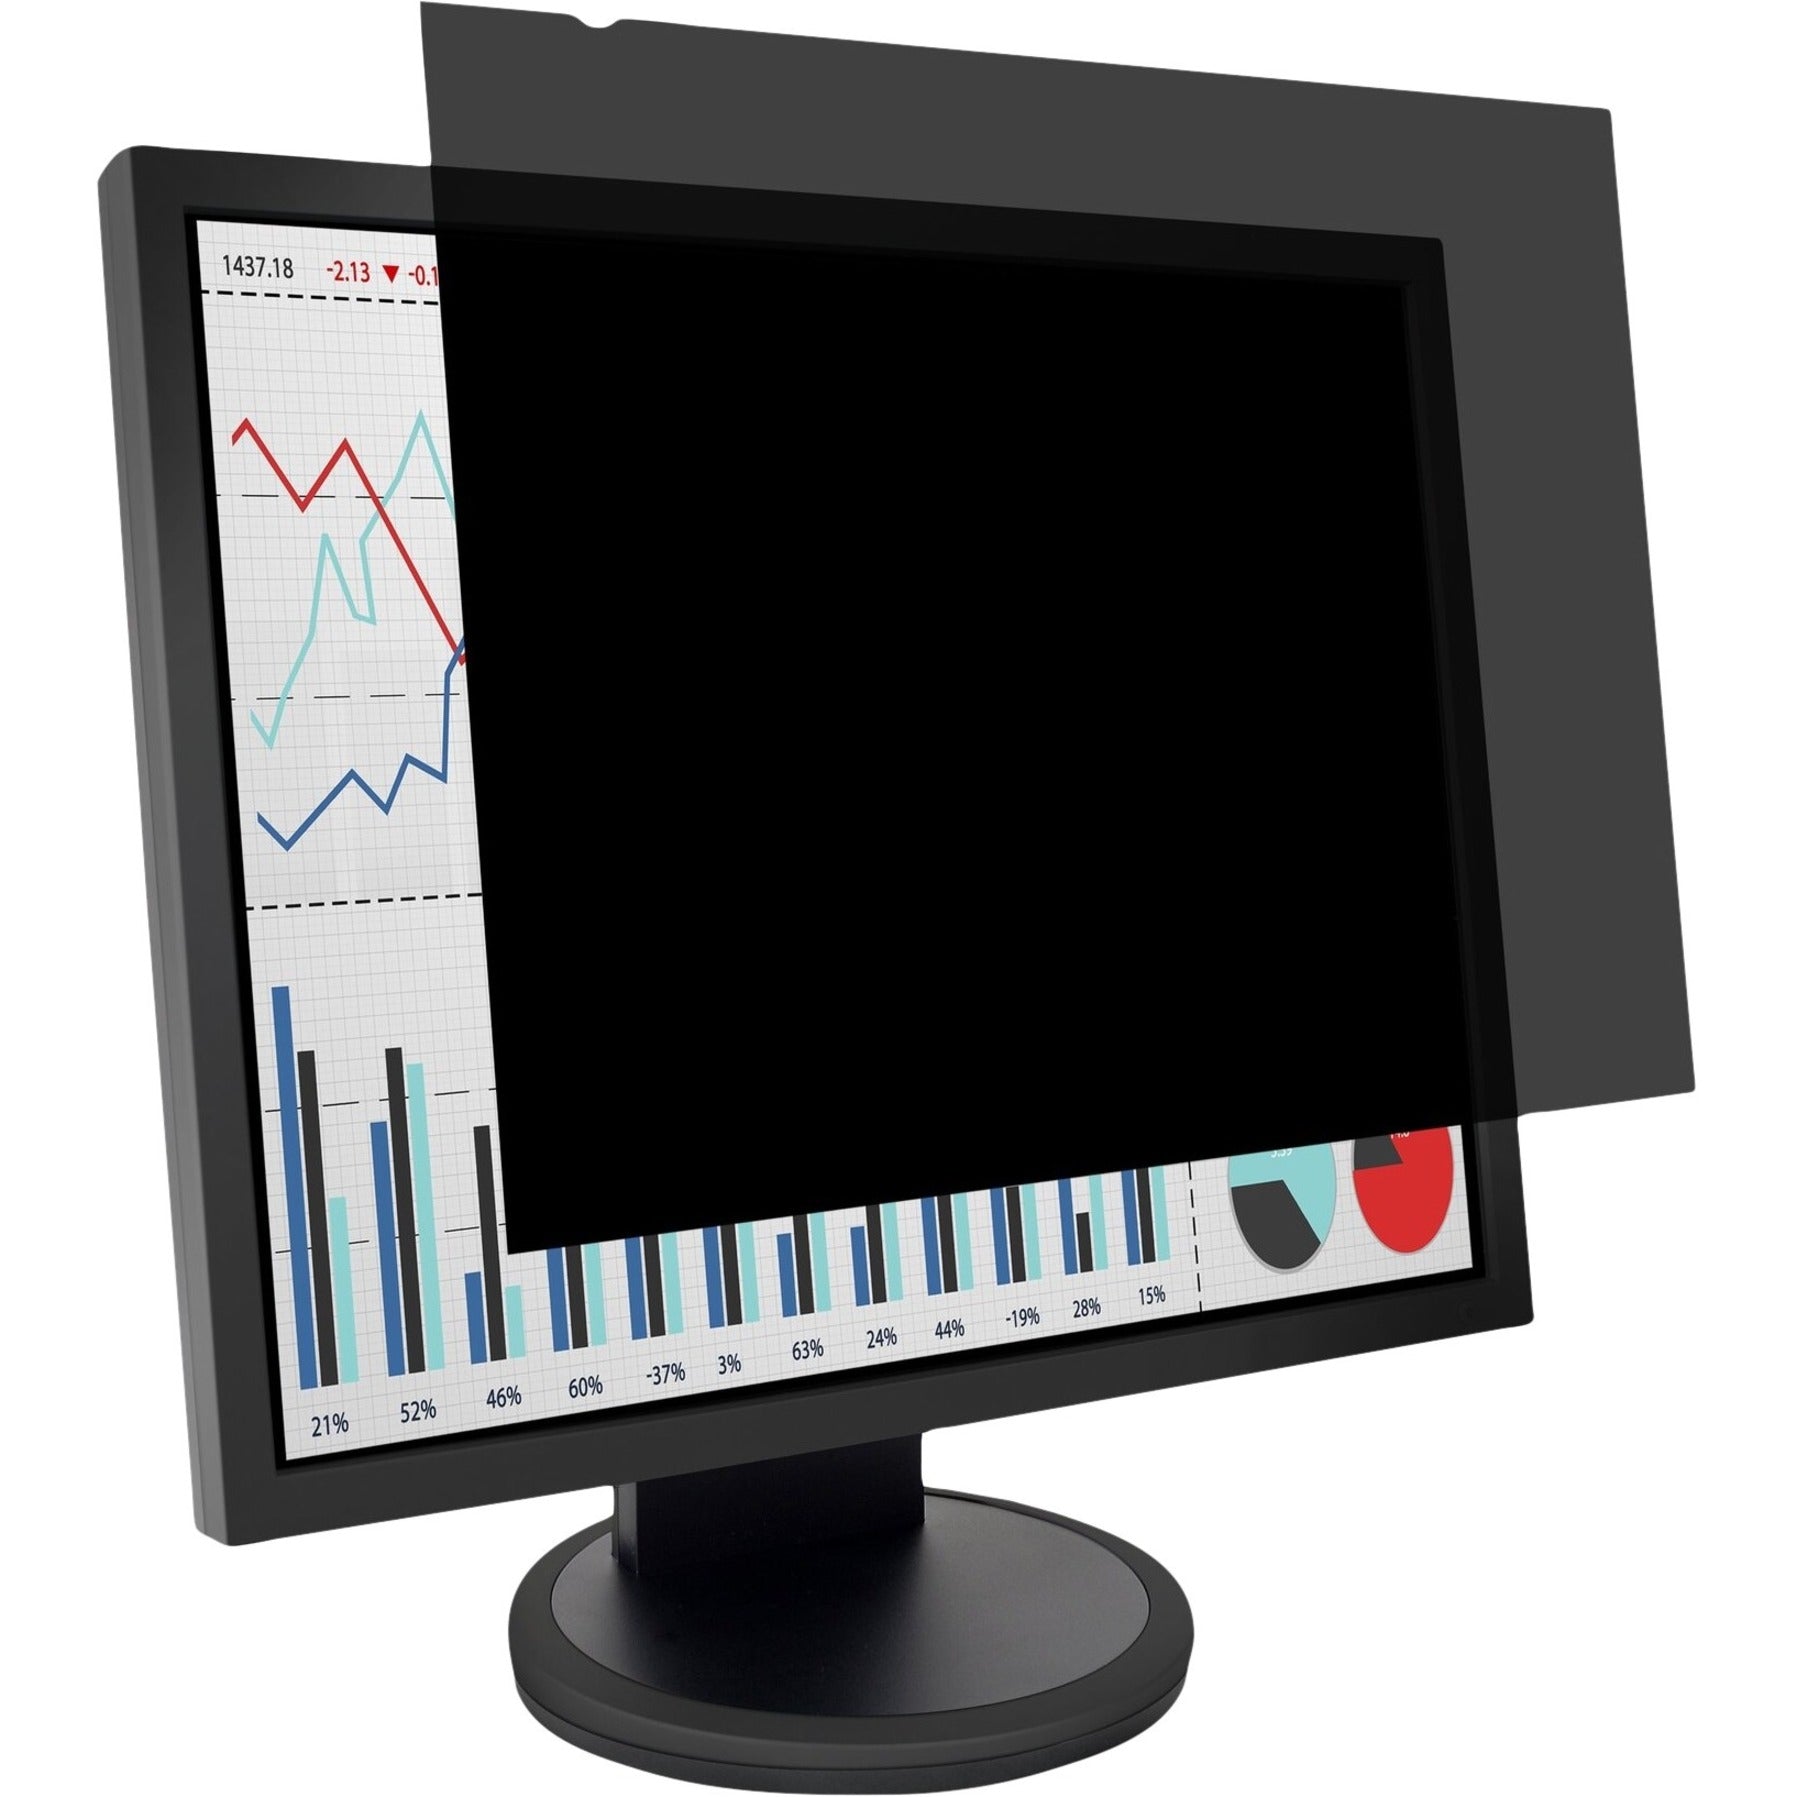 Kensington K52108WW FP181 Privacy Screen for 19 Monitors (5:4), Blue Light Reduction, Easy to Apply, Tinted Clear